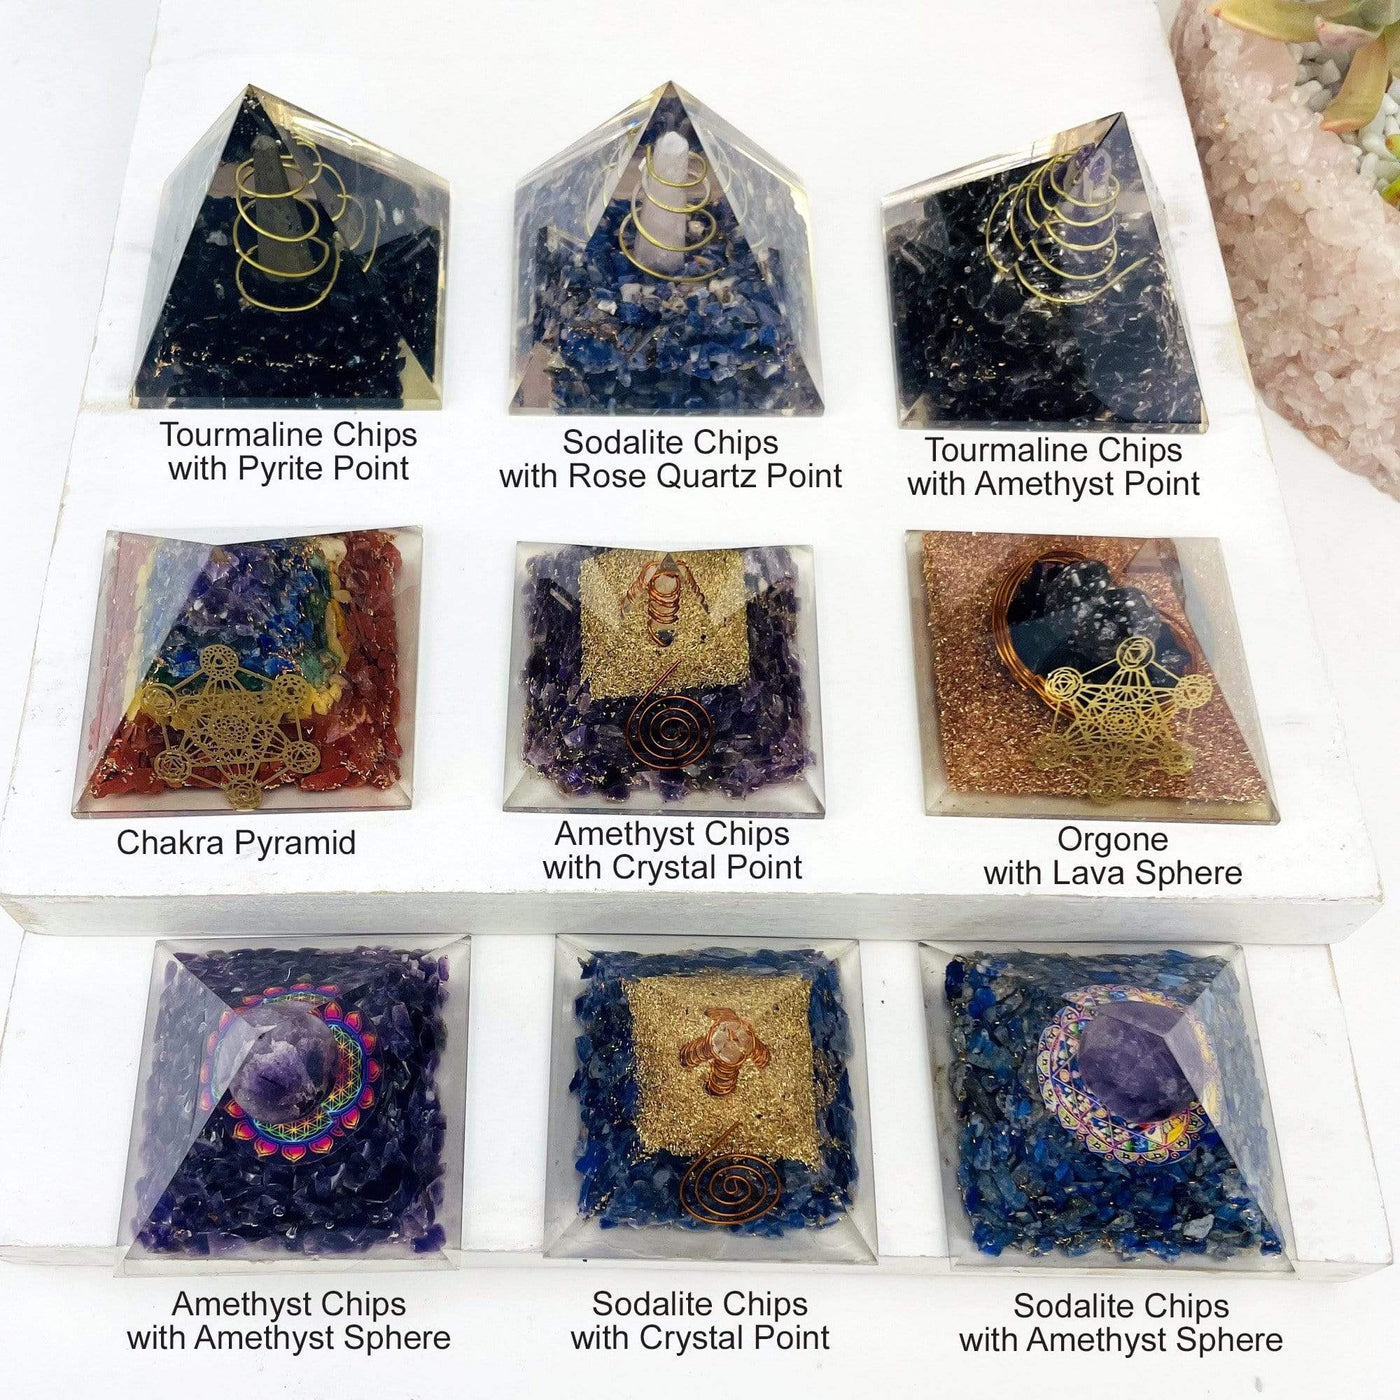 Orgone Pyramids come in tourmaline chips with pyrite point sodalite chips with rose quartz point tourmaline chips with amethyst point chakra pyramid amethyst chips with crystal point orgone with lava sphere amethyst chips with amethyst sphere sodalite chips with crystal point sodalite chips with amethyst sphere